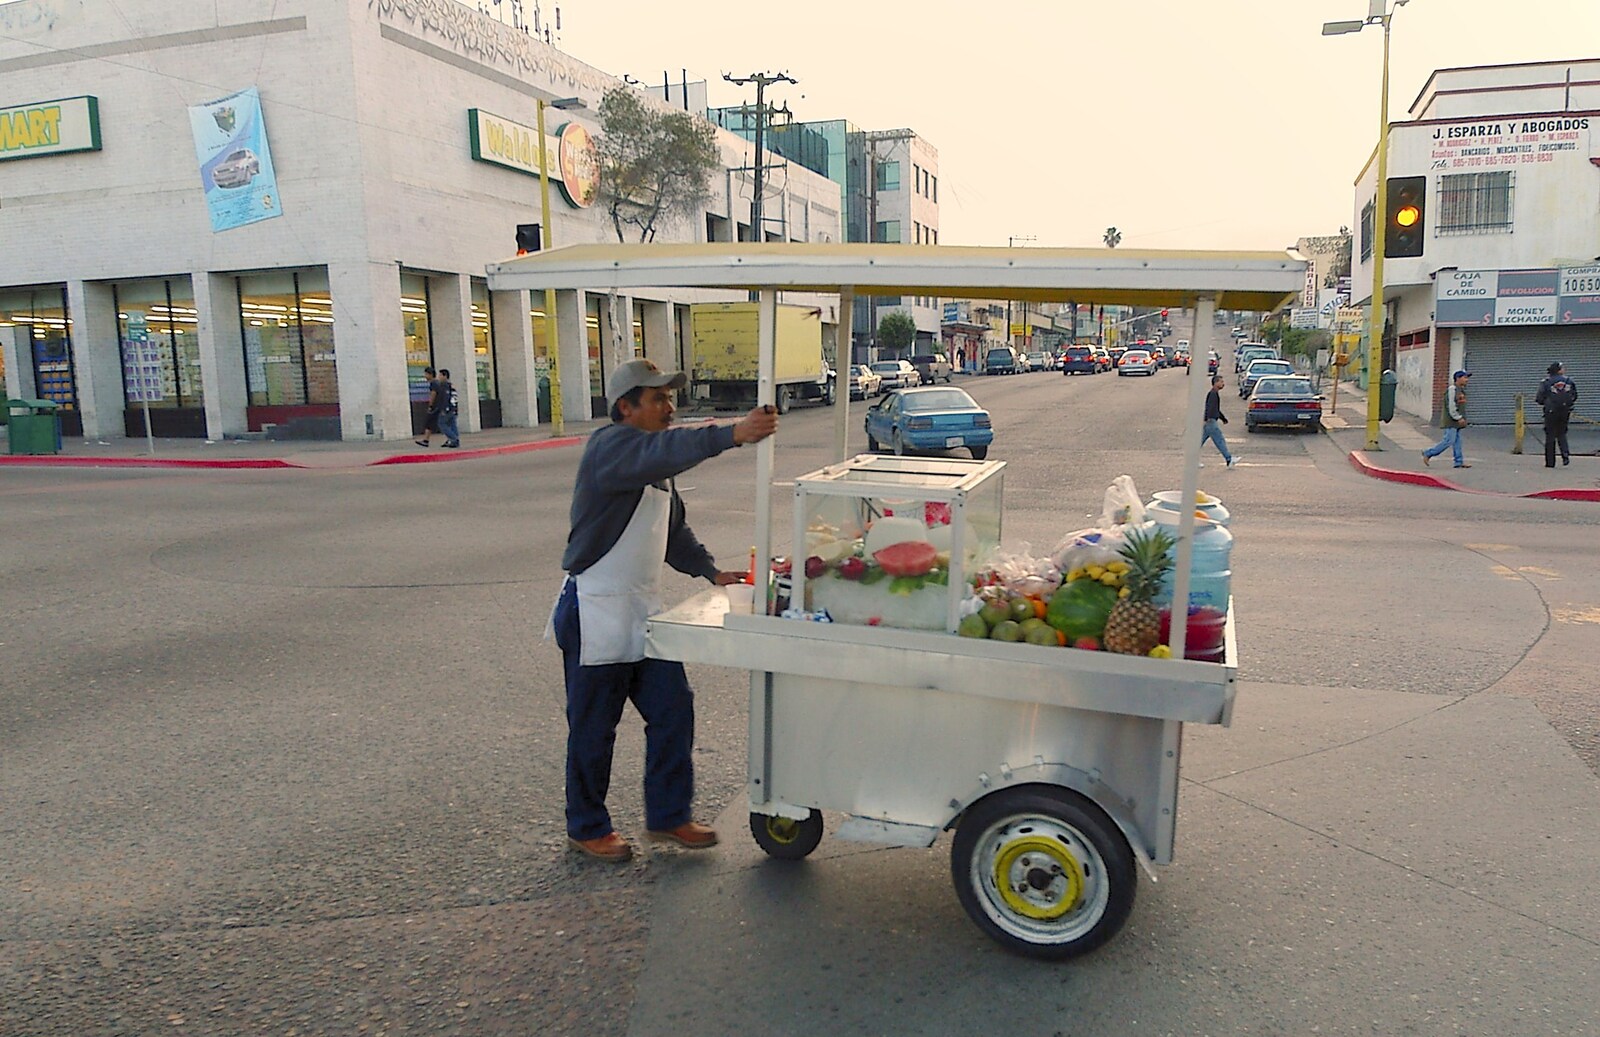 A street vendor wheels his foodstuffs downtown from A Trip to Tijuana, Mexico - 25th March 2006